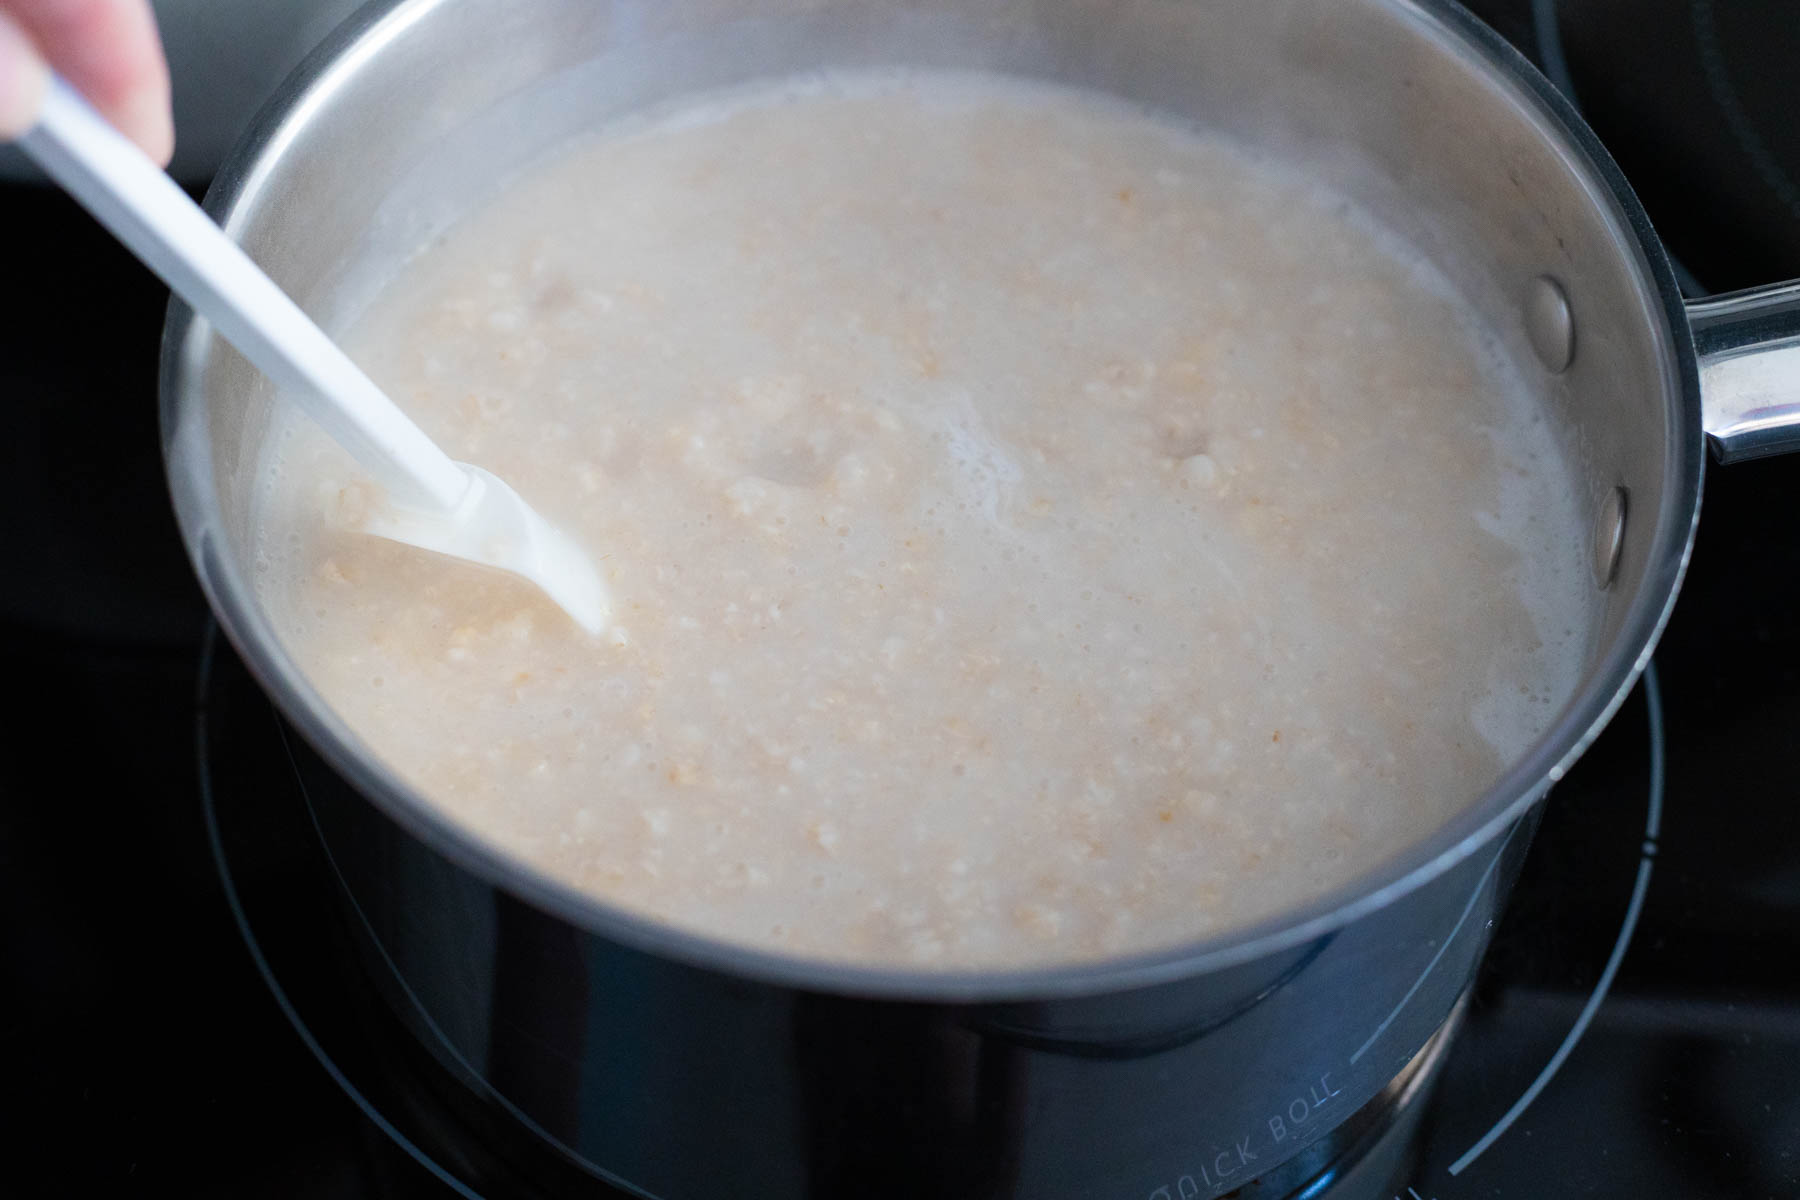 The oatmeal has been boiled and is quite thick.